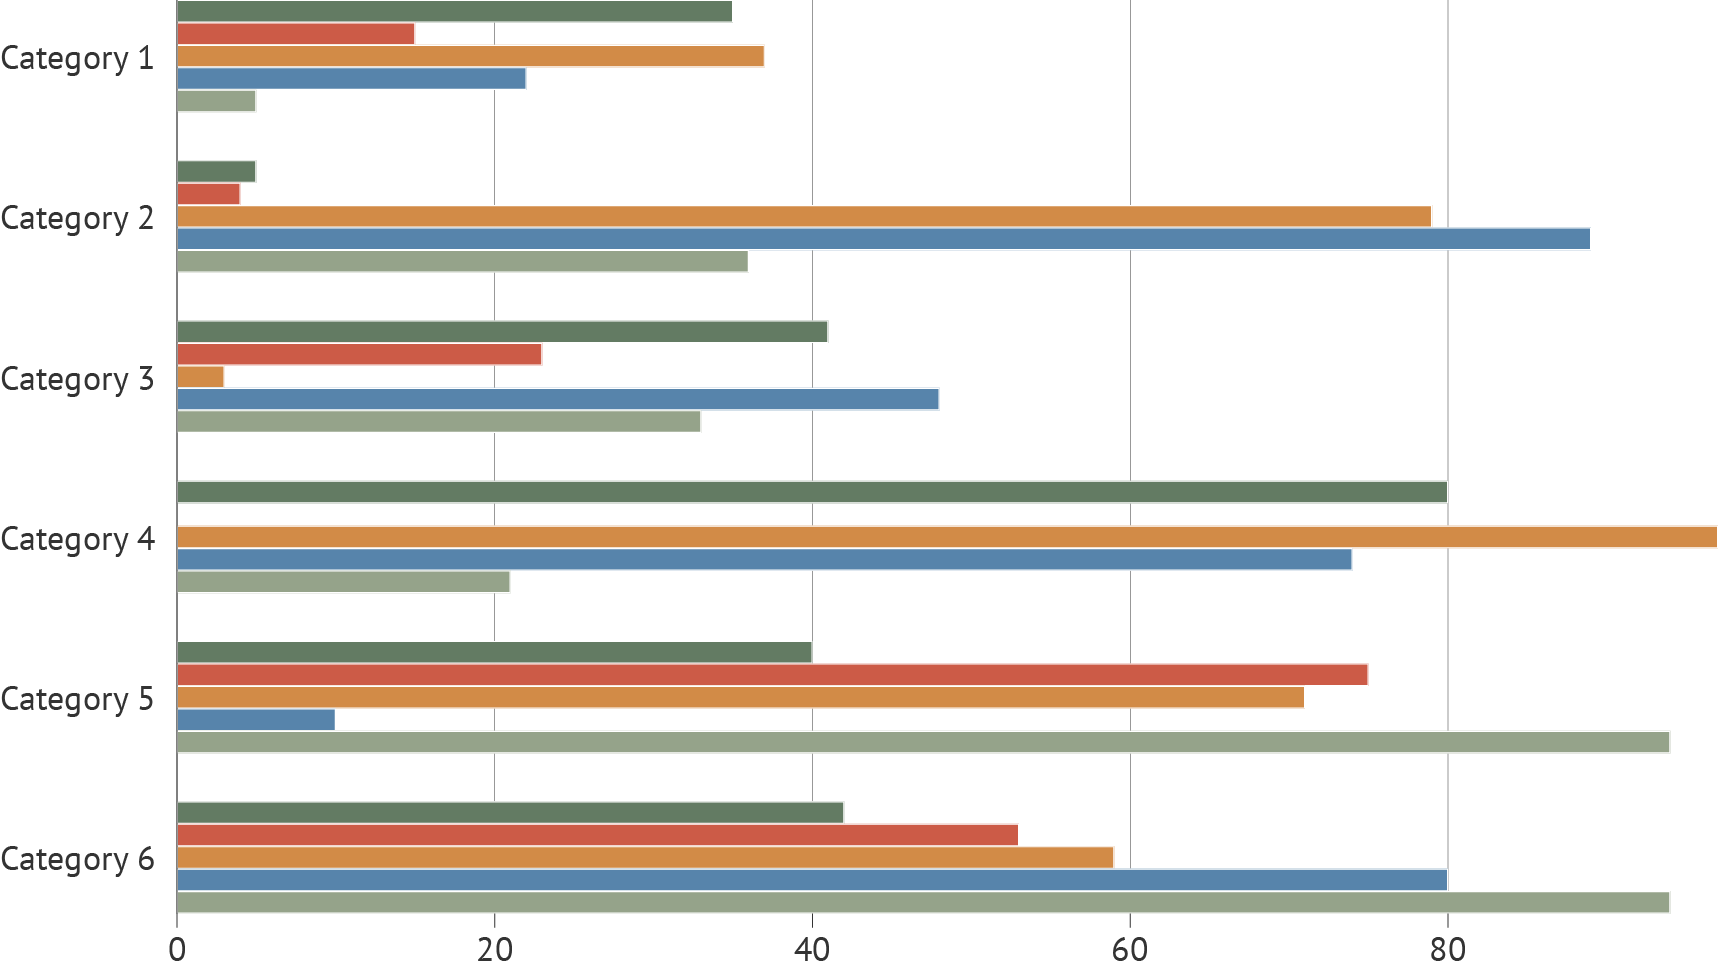 A grouped bar chart with 5 bars for each of 6 categories